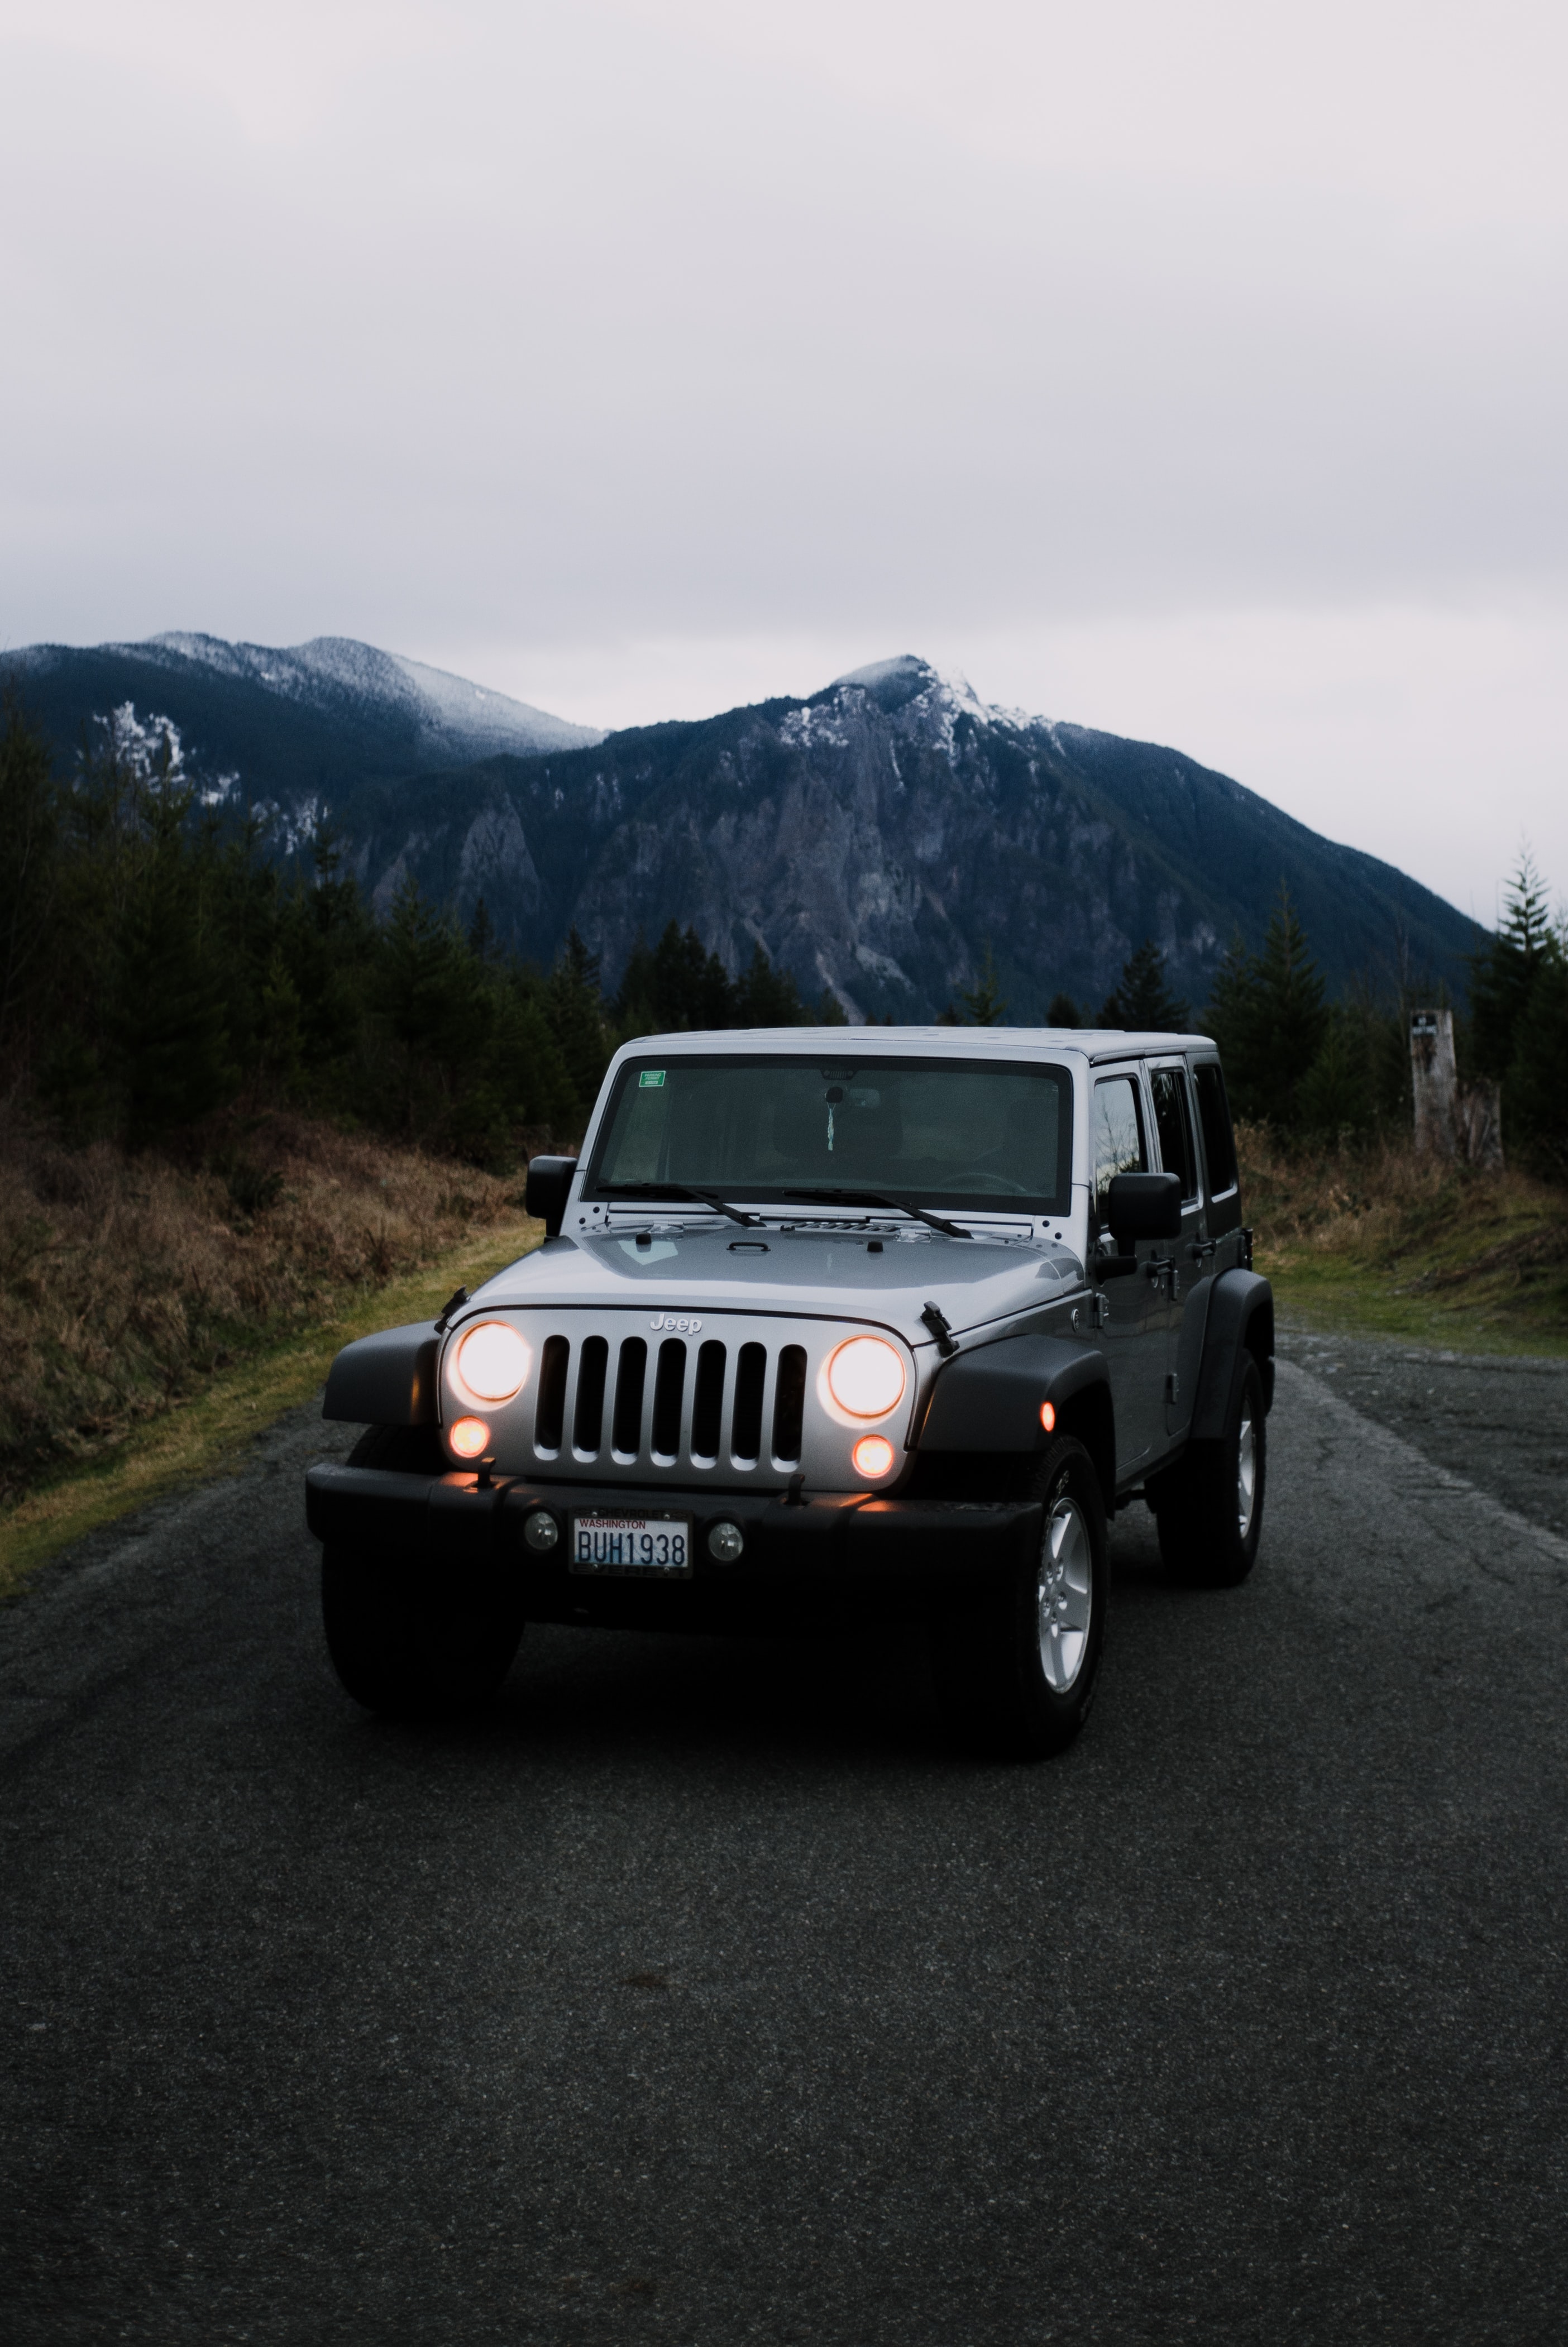  Jeep Wrangler HQ Background Images